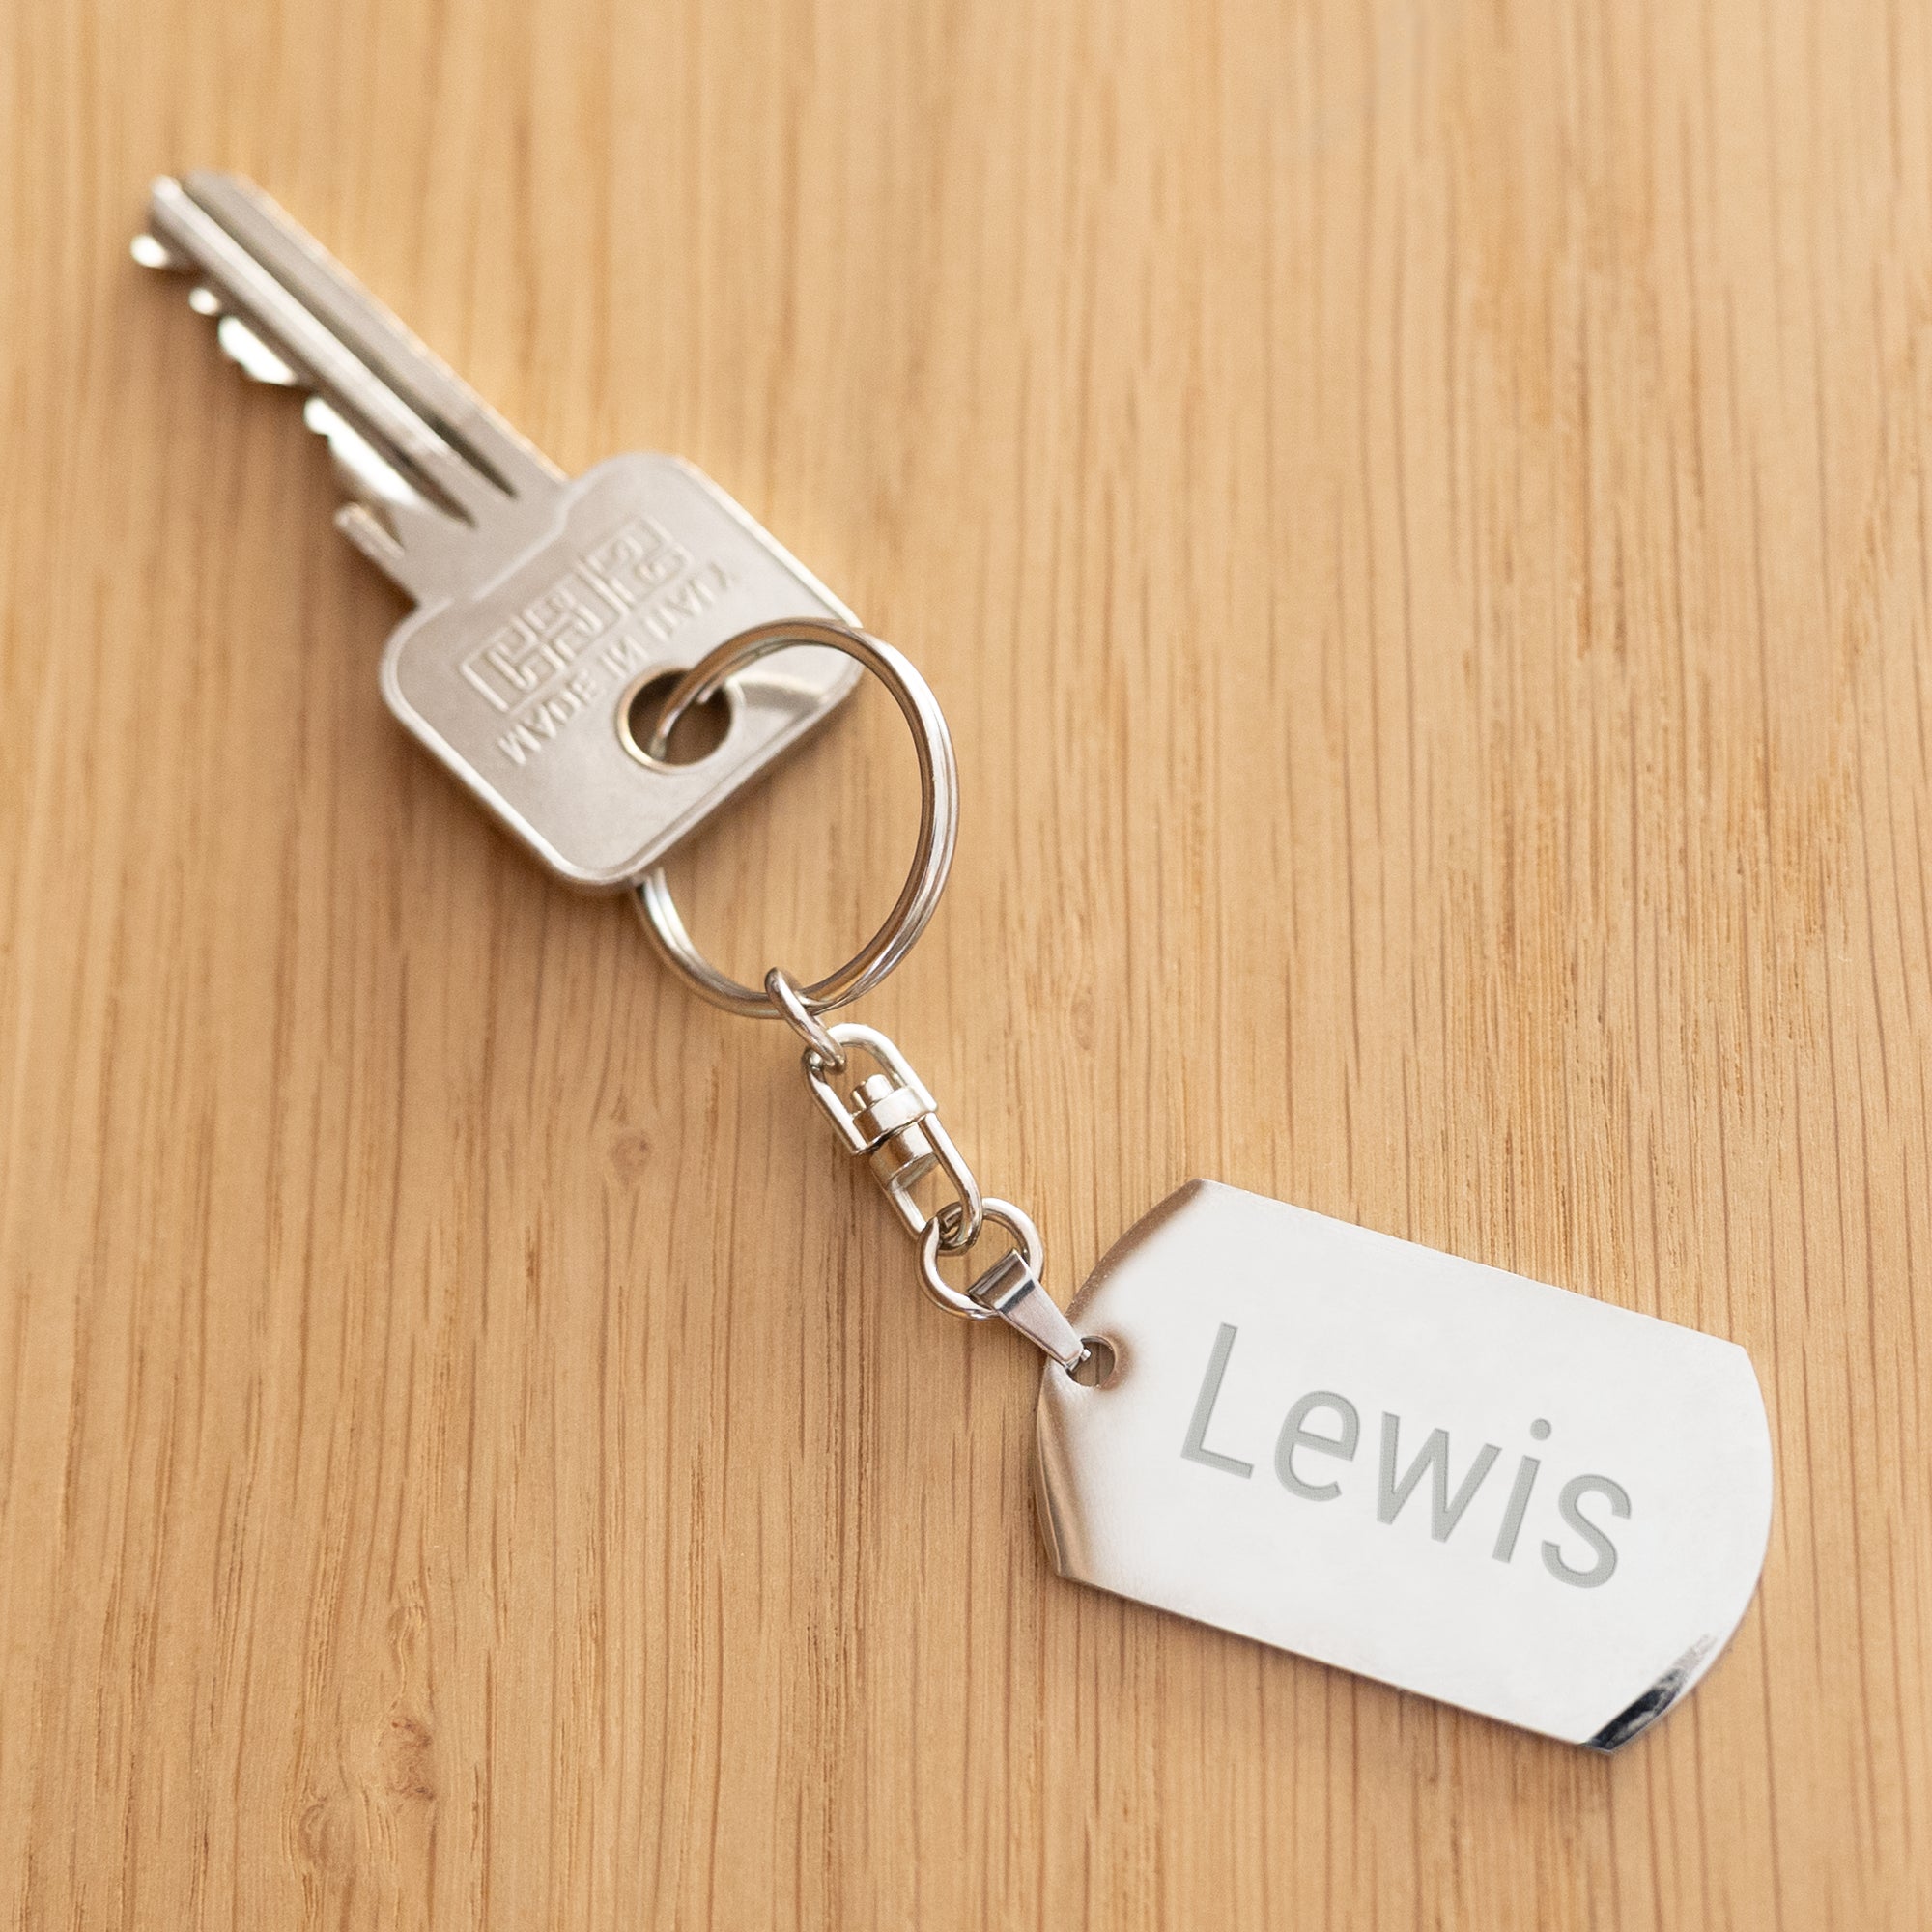 Personalised key ring - Dog tag - Stainless steel - Engraved - Text